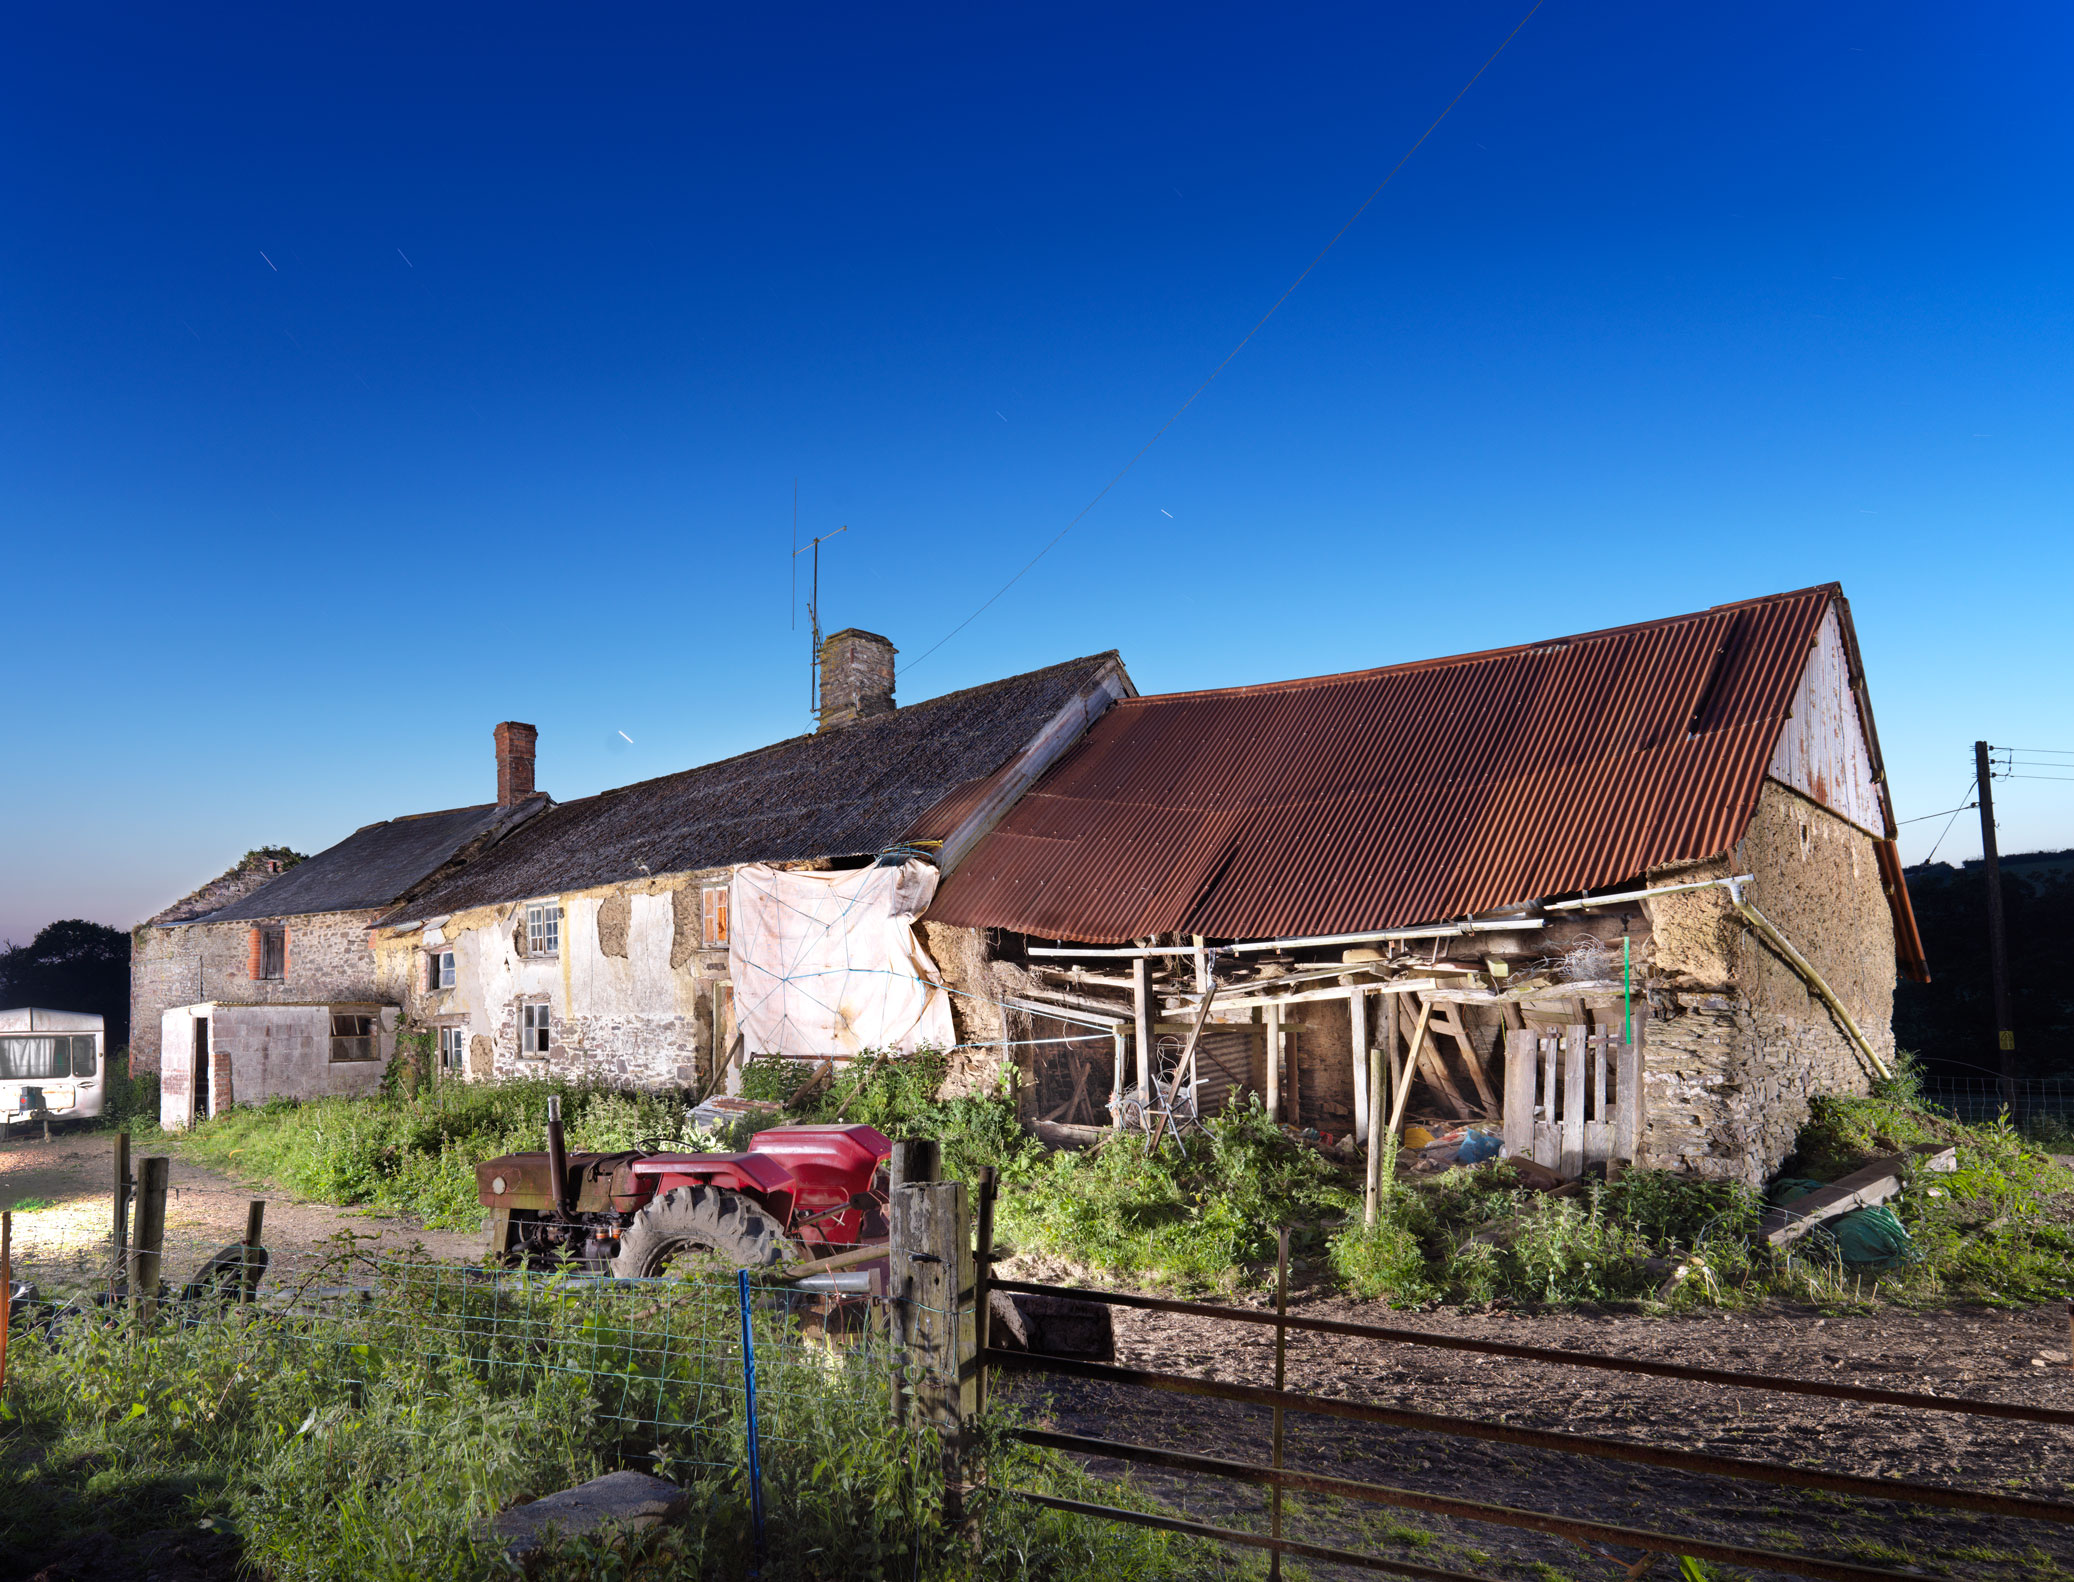 A farmhouse flanked by derelict outbuildings.